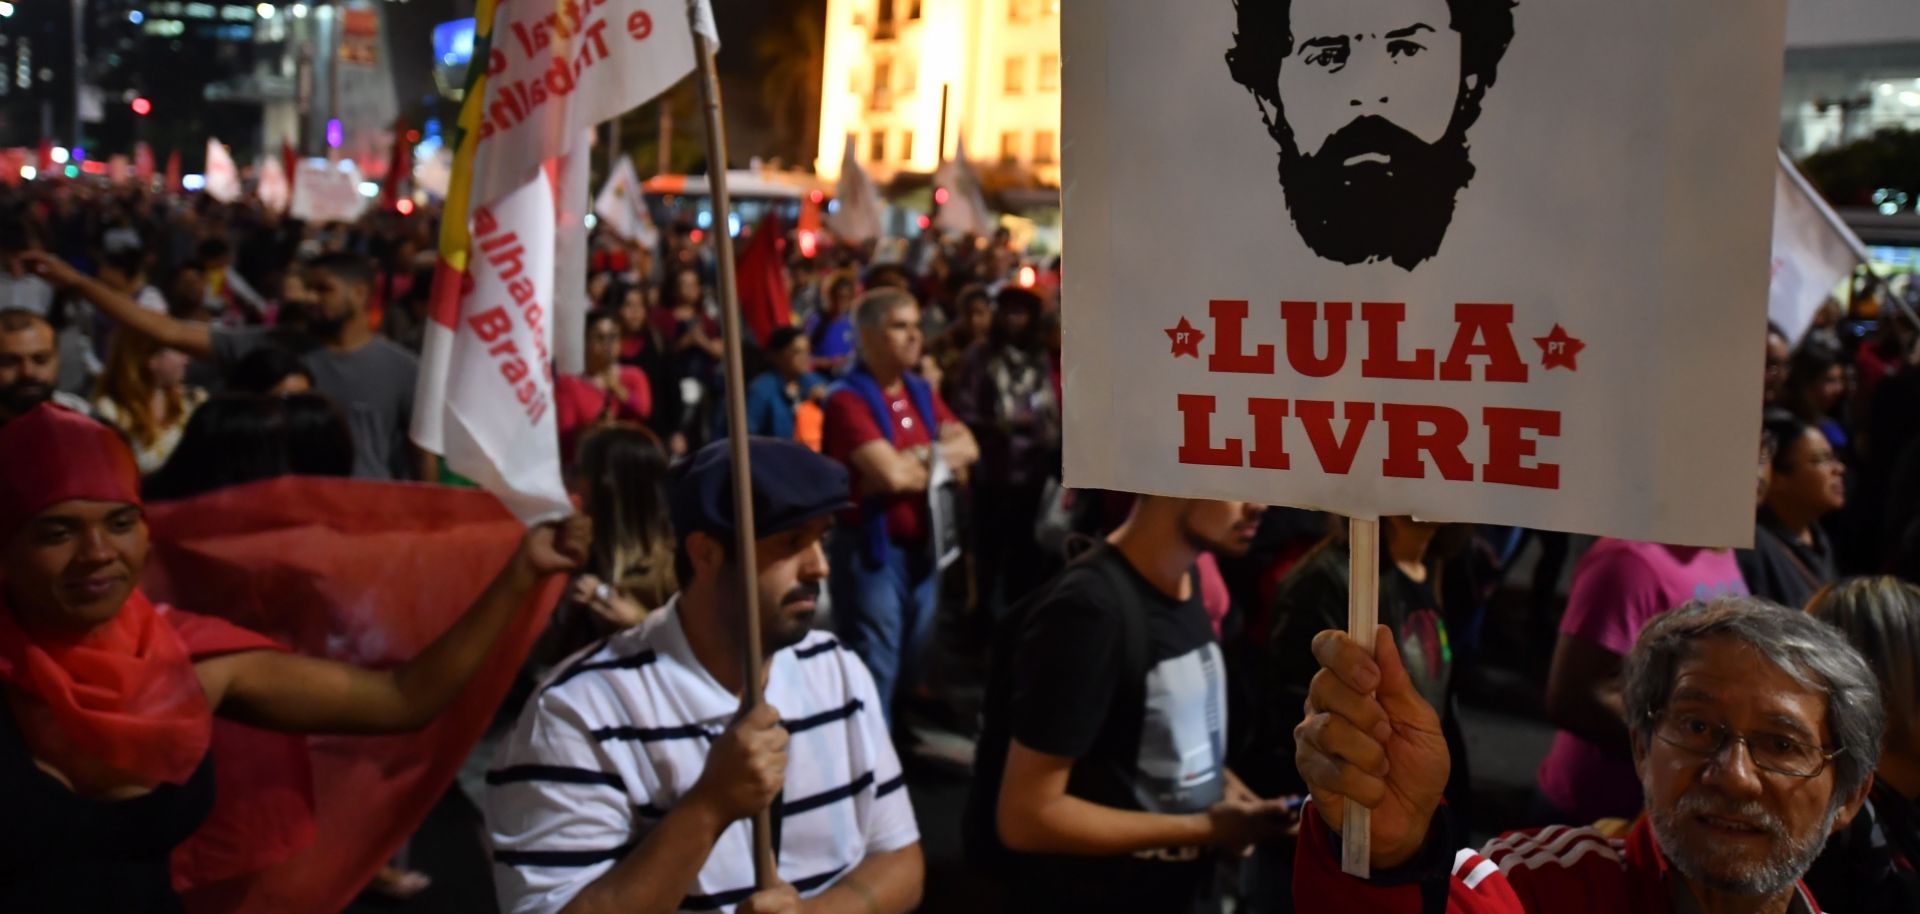 A demonstrator holding a "Free Lula" sign shows his support for former Brazilian President Luiz Inacio Lula da Silva during a May 30, 2018, protest in Sao Paulo. Da Silva was imprisoned in April on a corruption conviction.